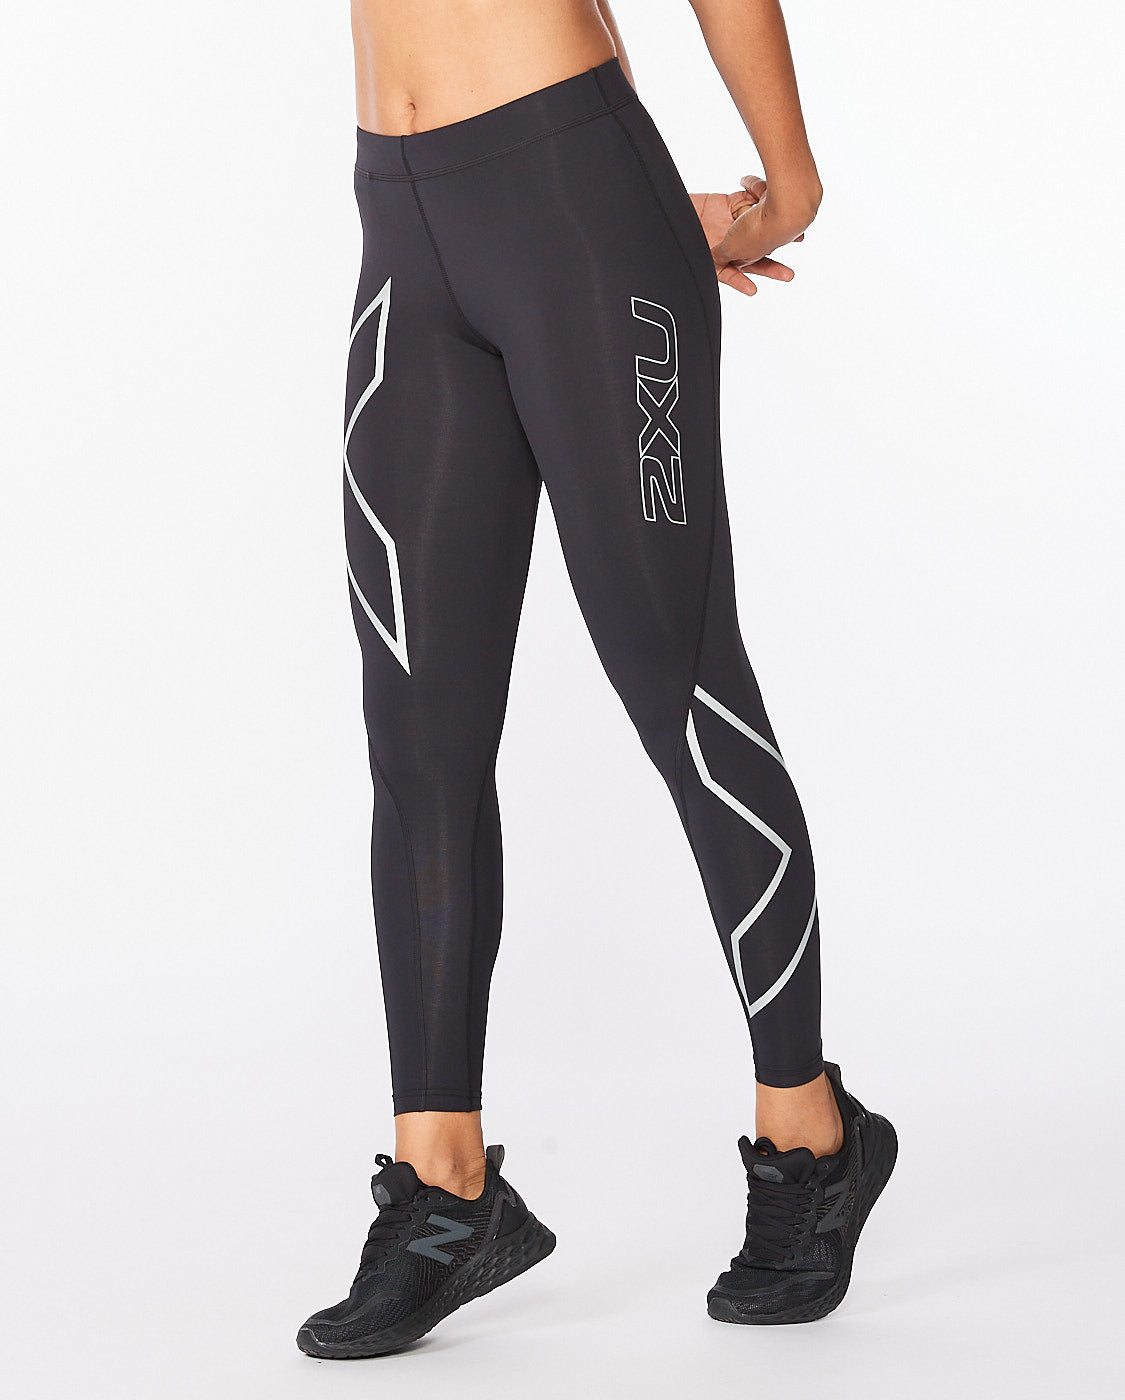 Bot Governable sokker Core Compression Tights | 2XU